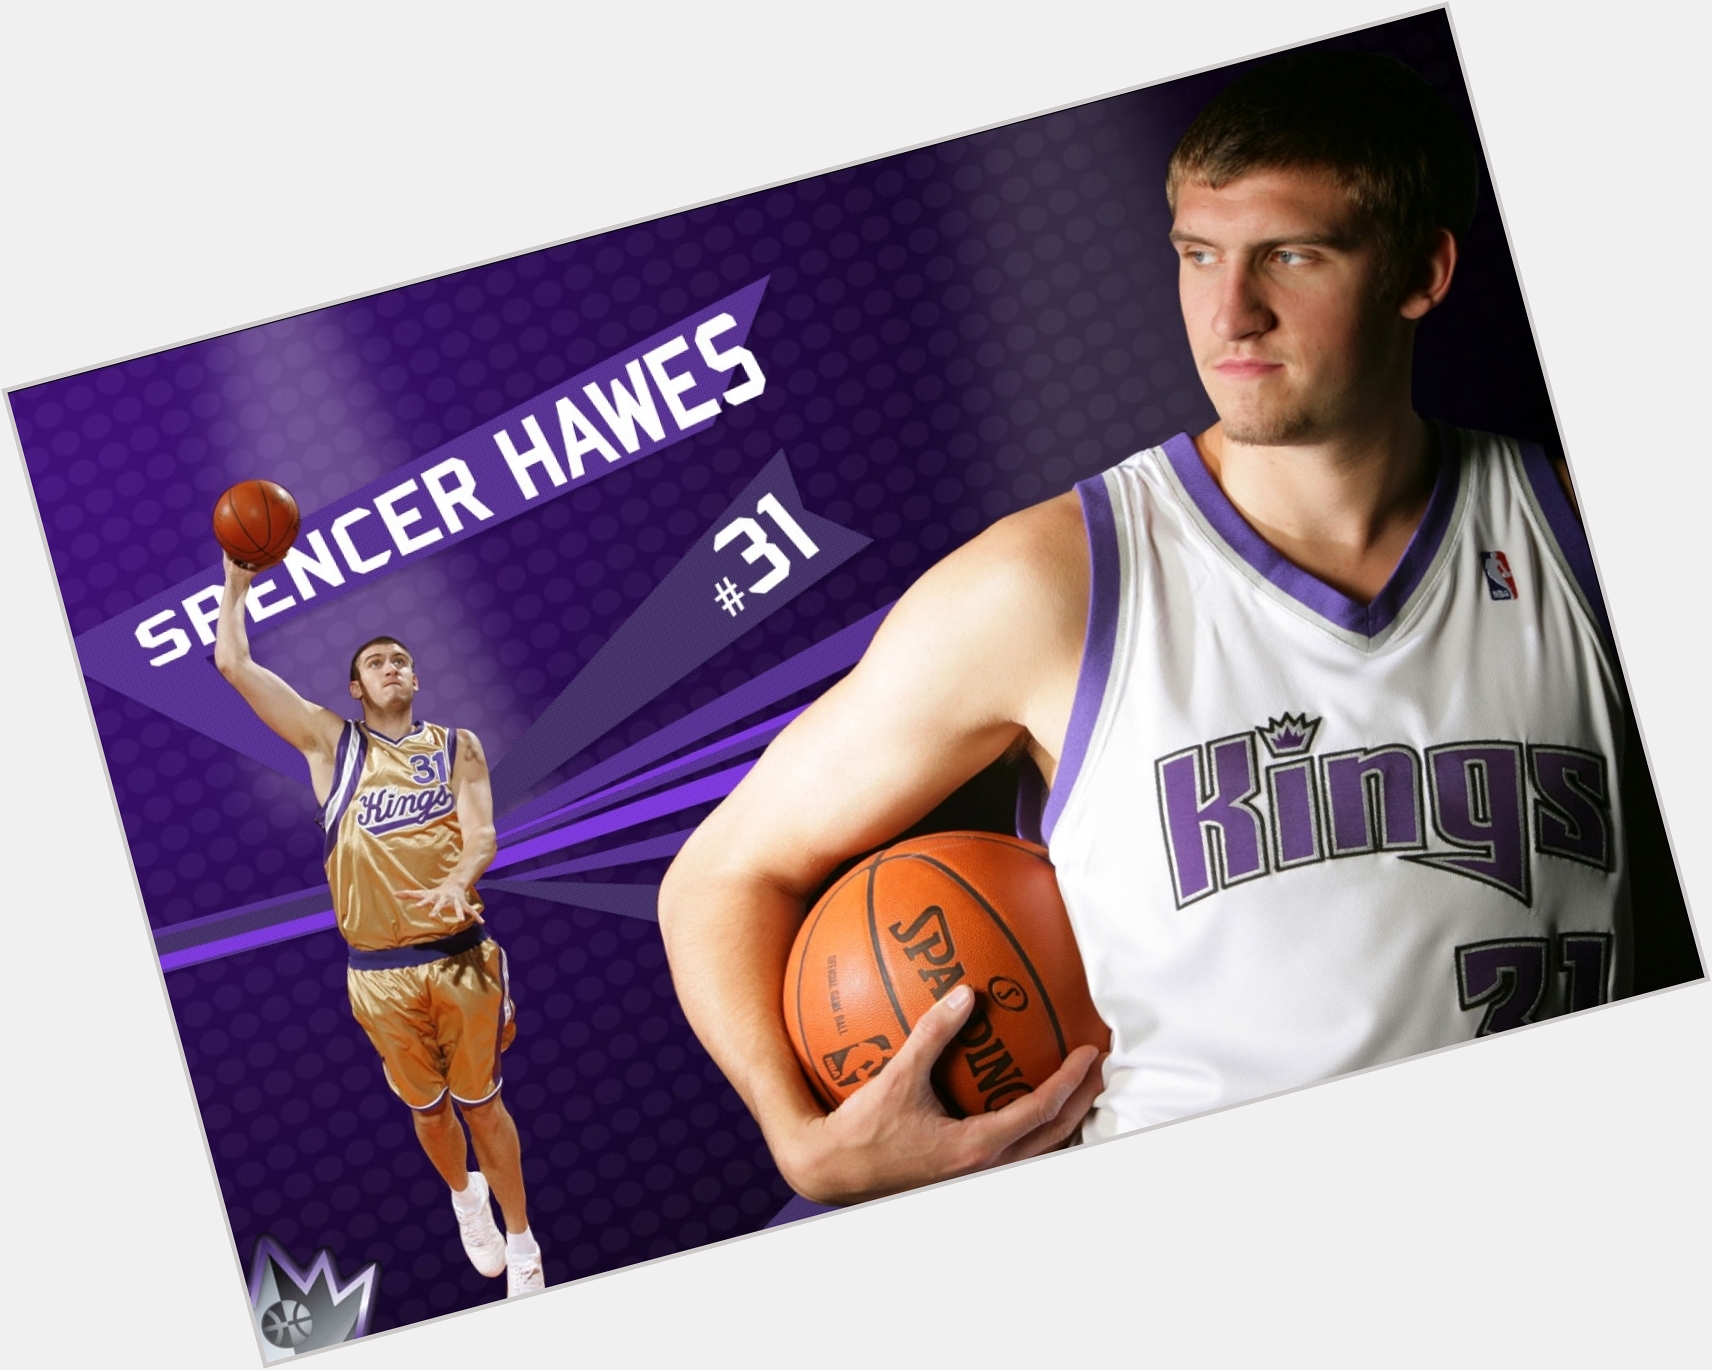 <a href="/hot-men/spencer-hawes/where-dating-news-photos">Spencer Hawes</a>  